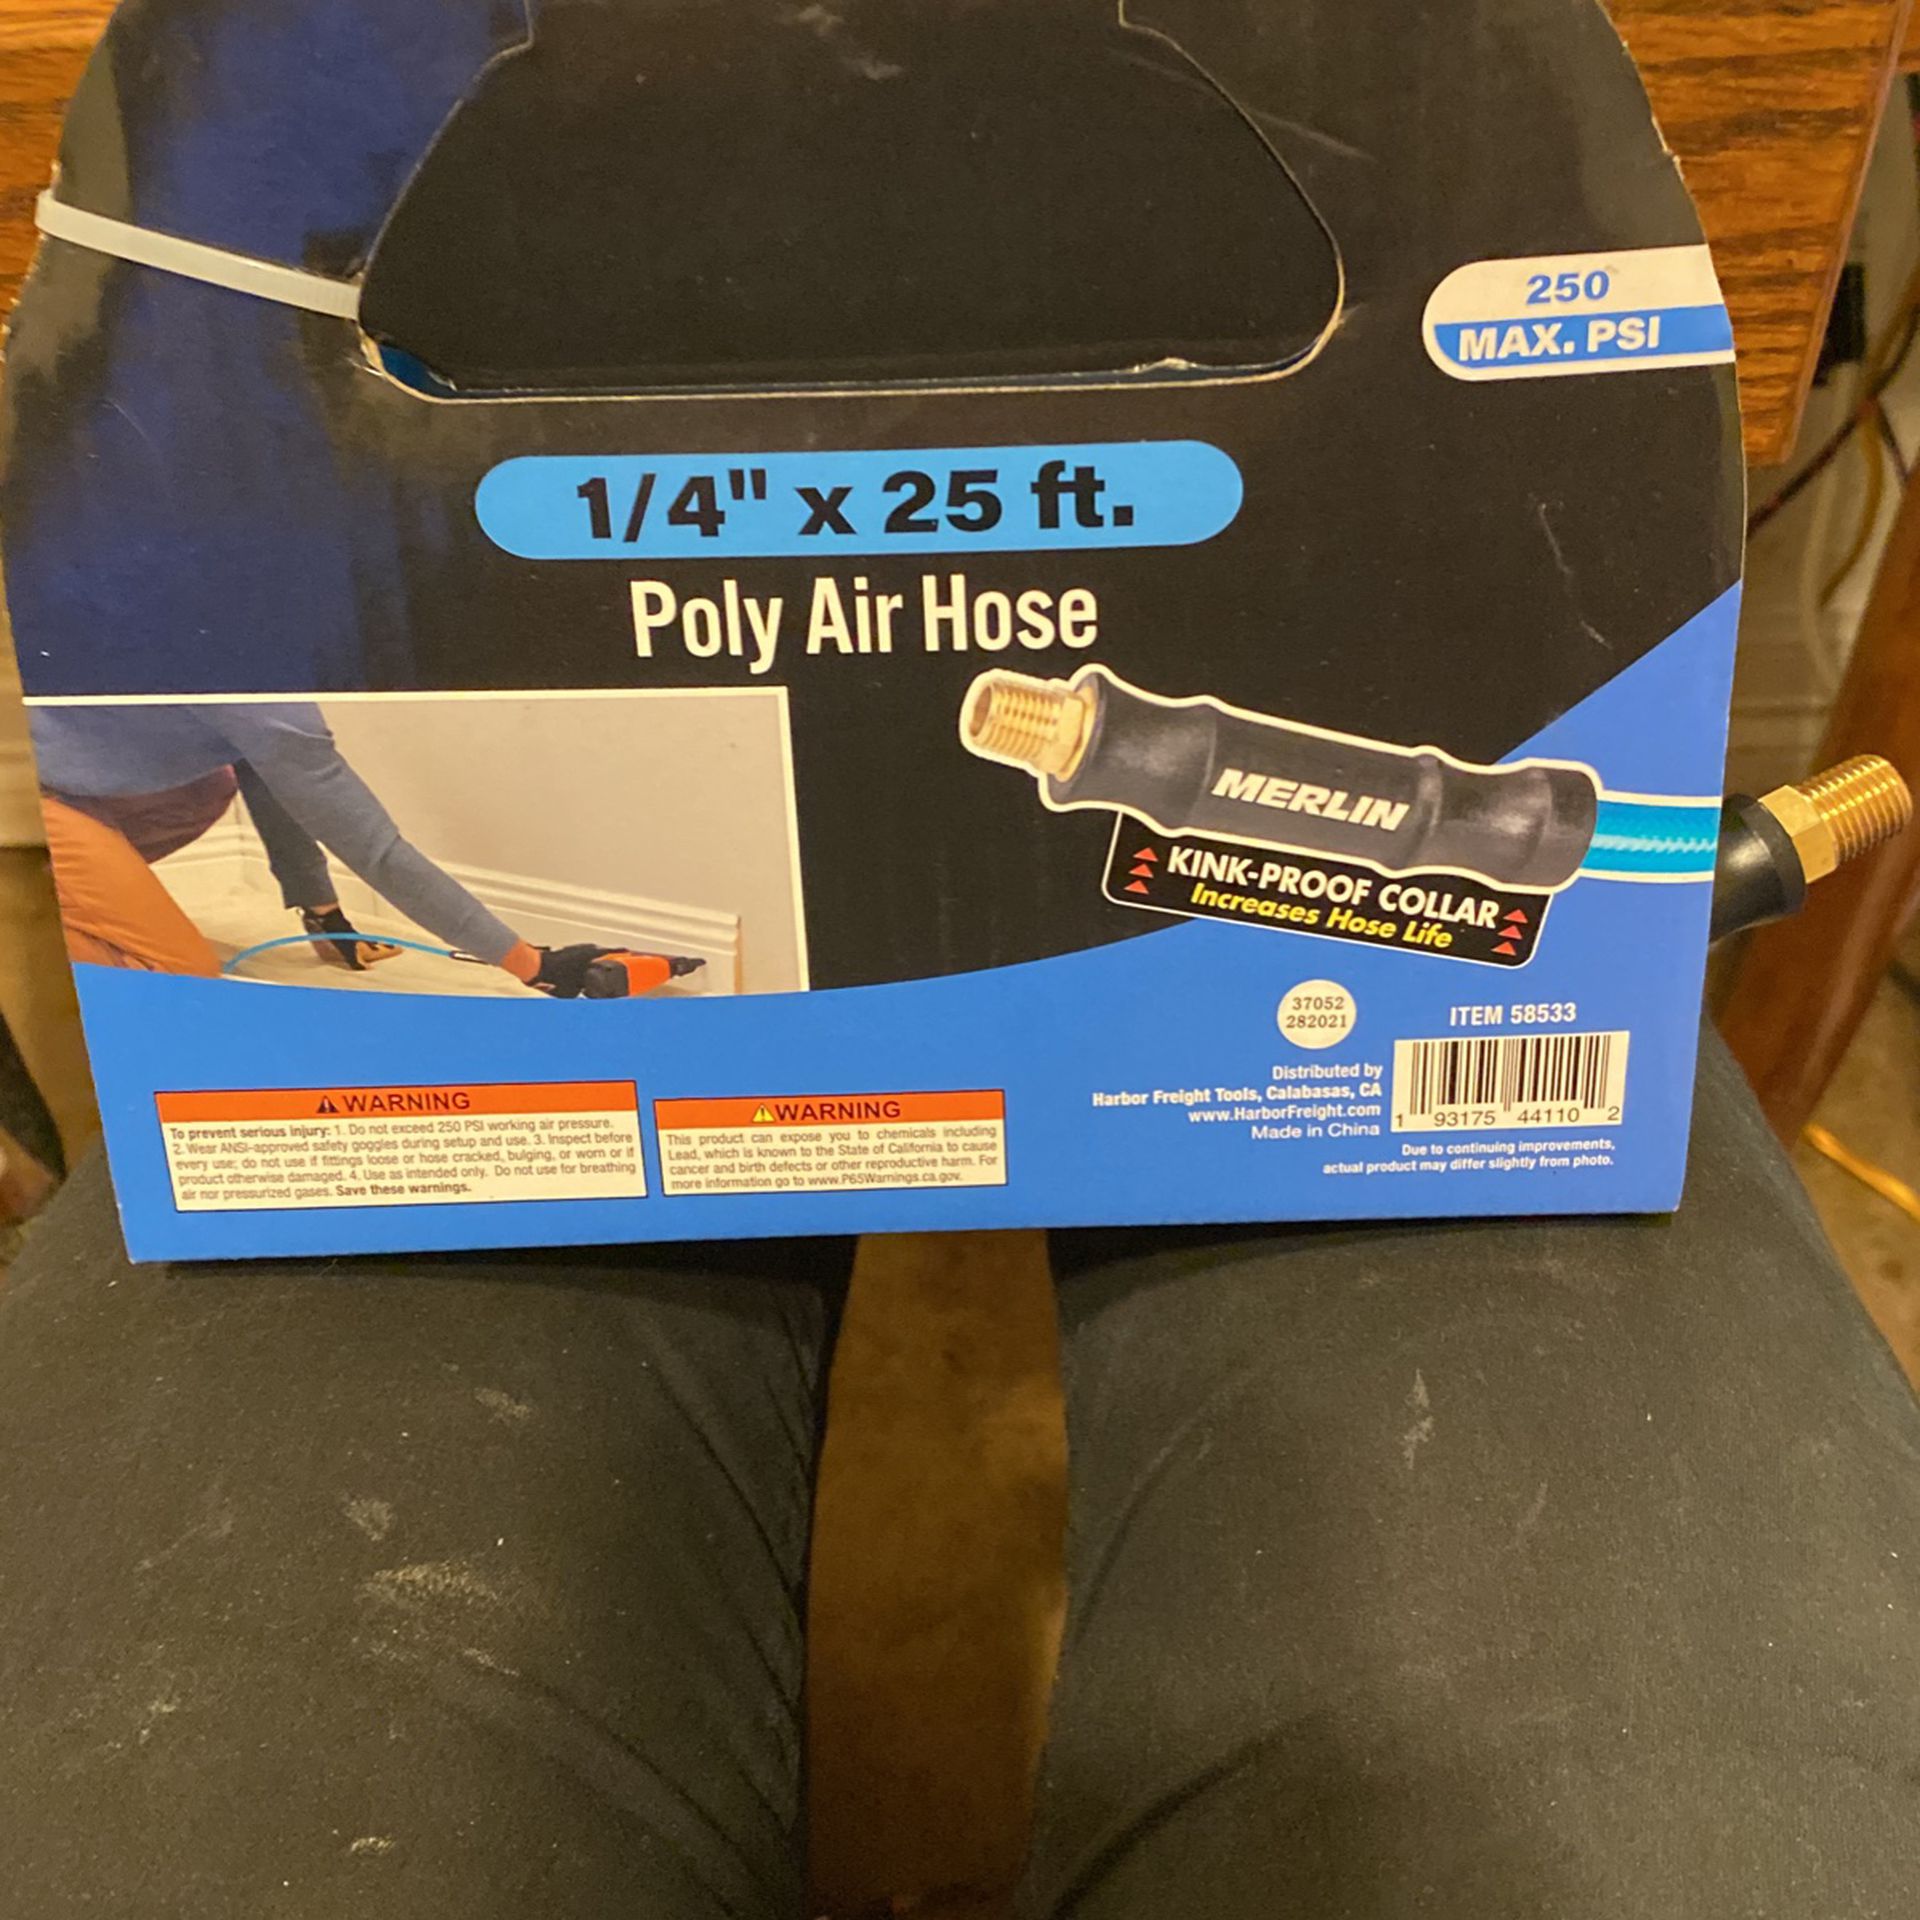 Brand new Berlin quarter inch 25 foot poly air hose light weight air hose with quick proof collar